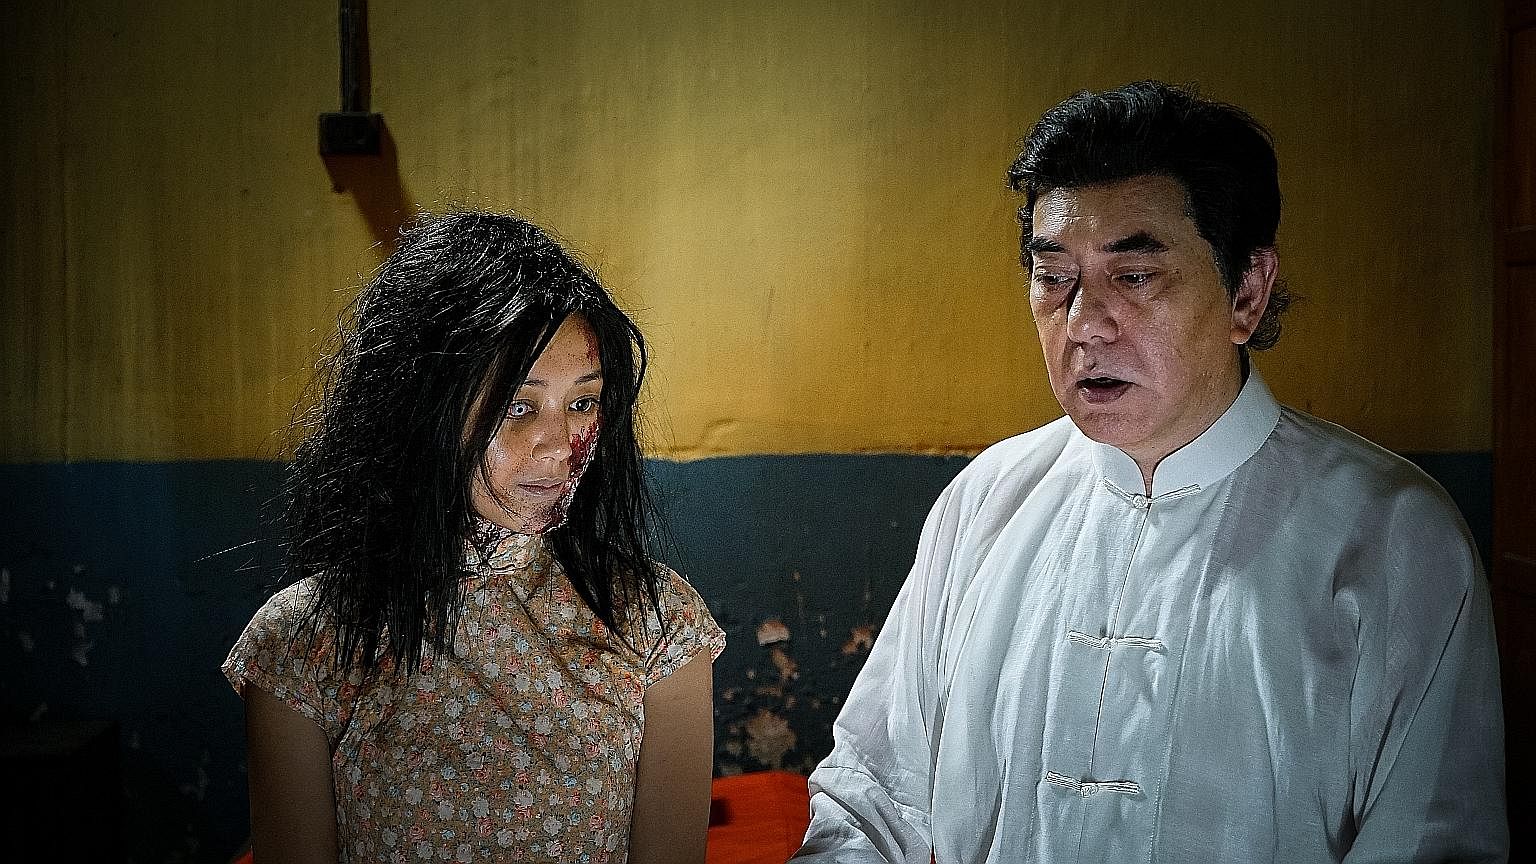 Above: The Sleep Curse stars Anthony Wong as a sleep researcher and Michelle Wai as a sex slave.